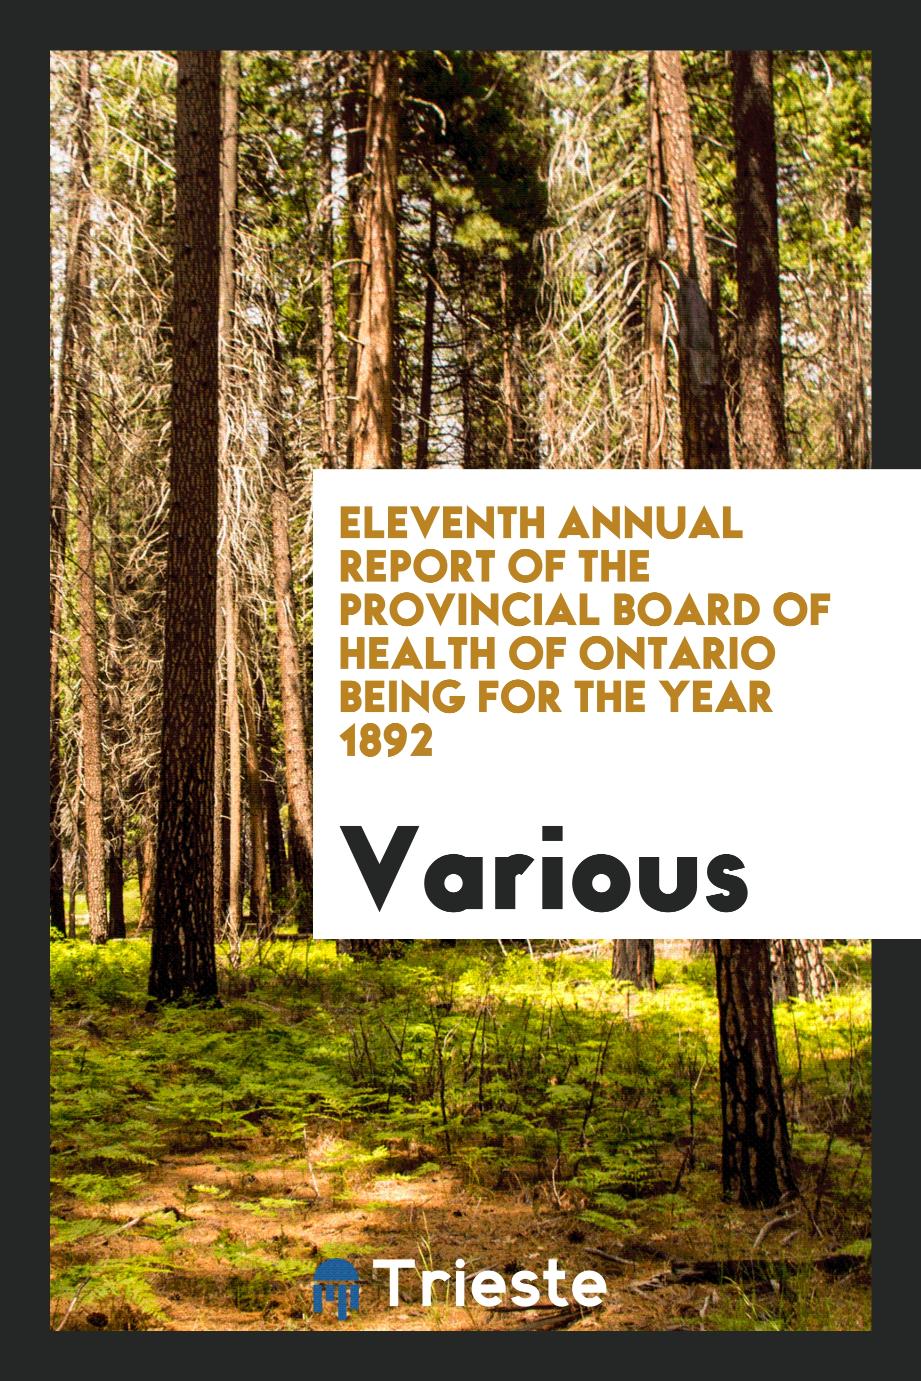 Eleventh Annual Report of the Provincial Board of Health of Ontario Being for the Year 1892